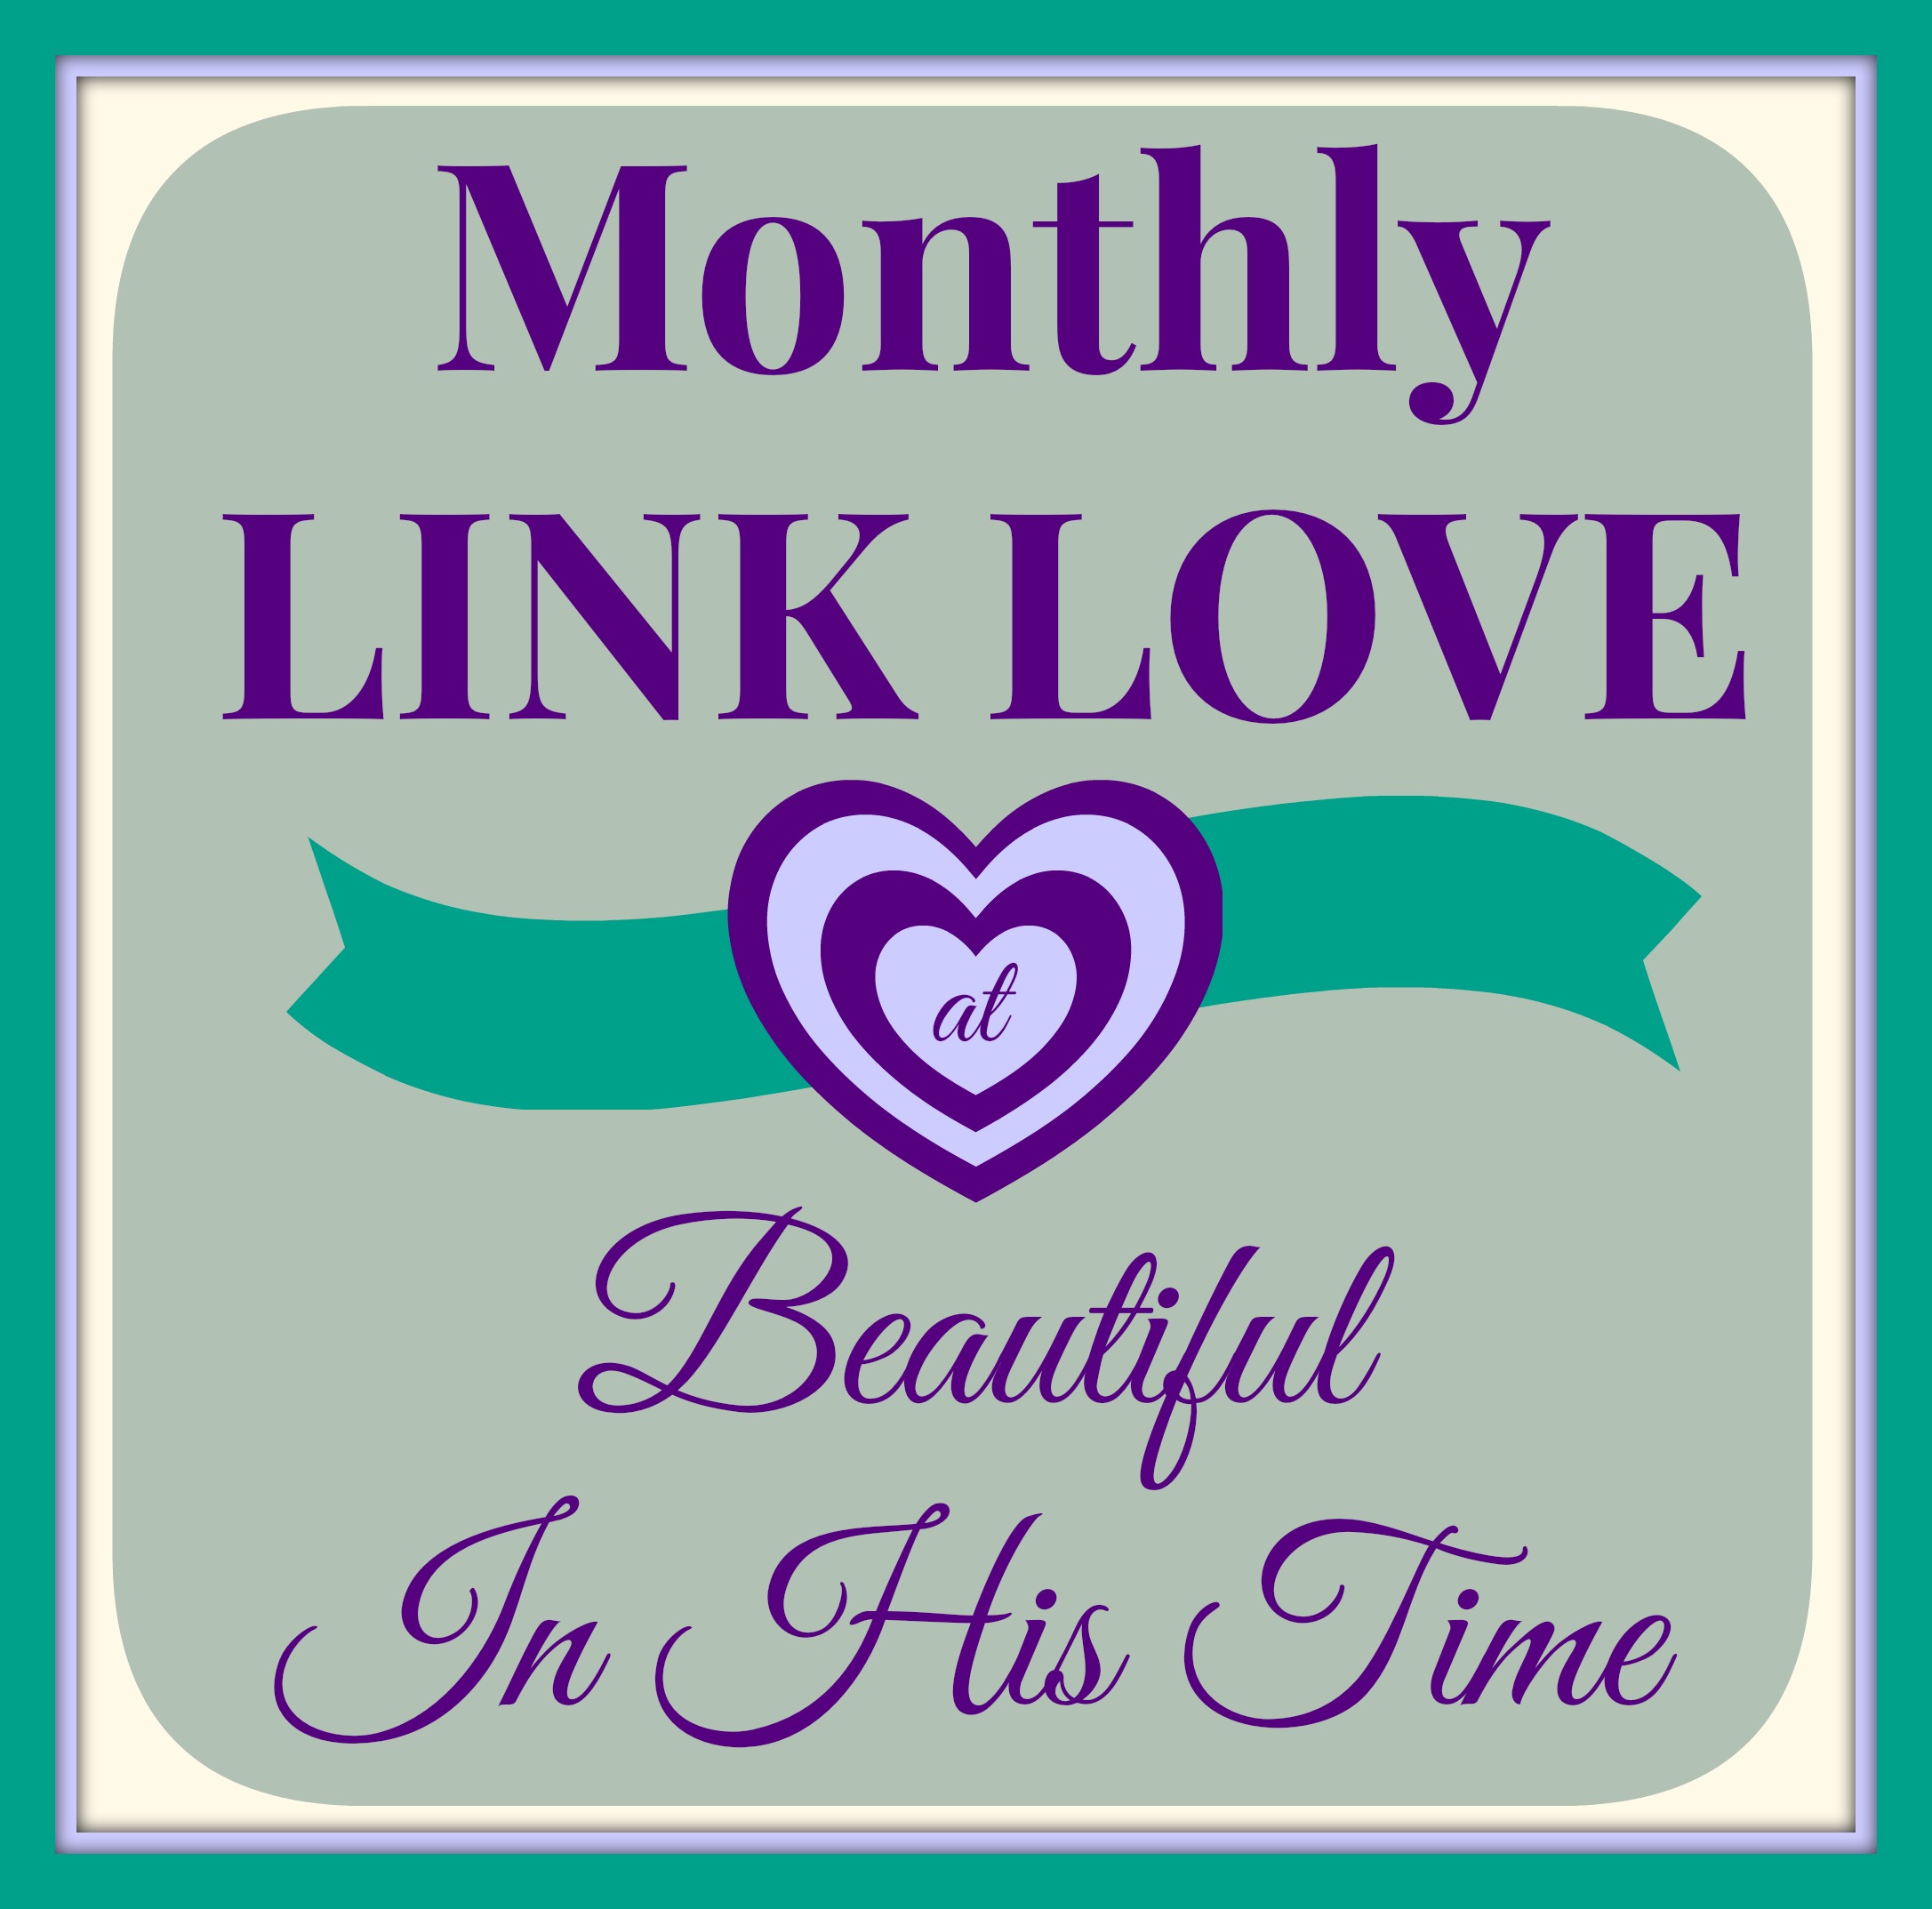 November Link Love @ Beautiful In His Time